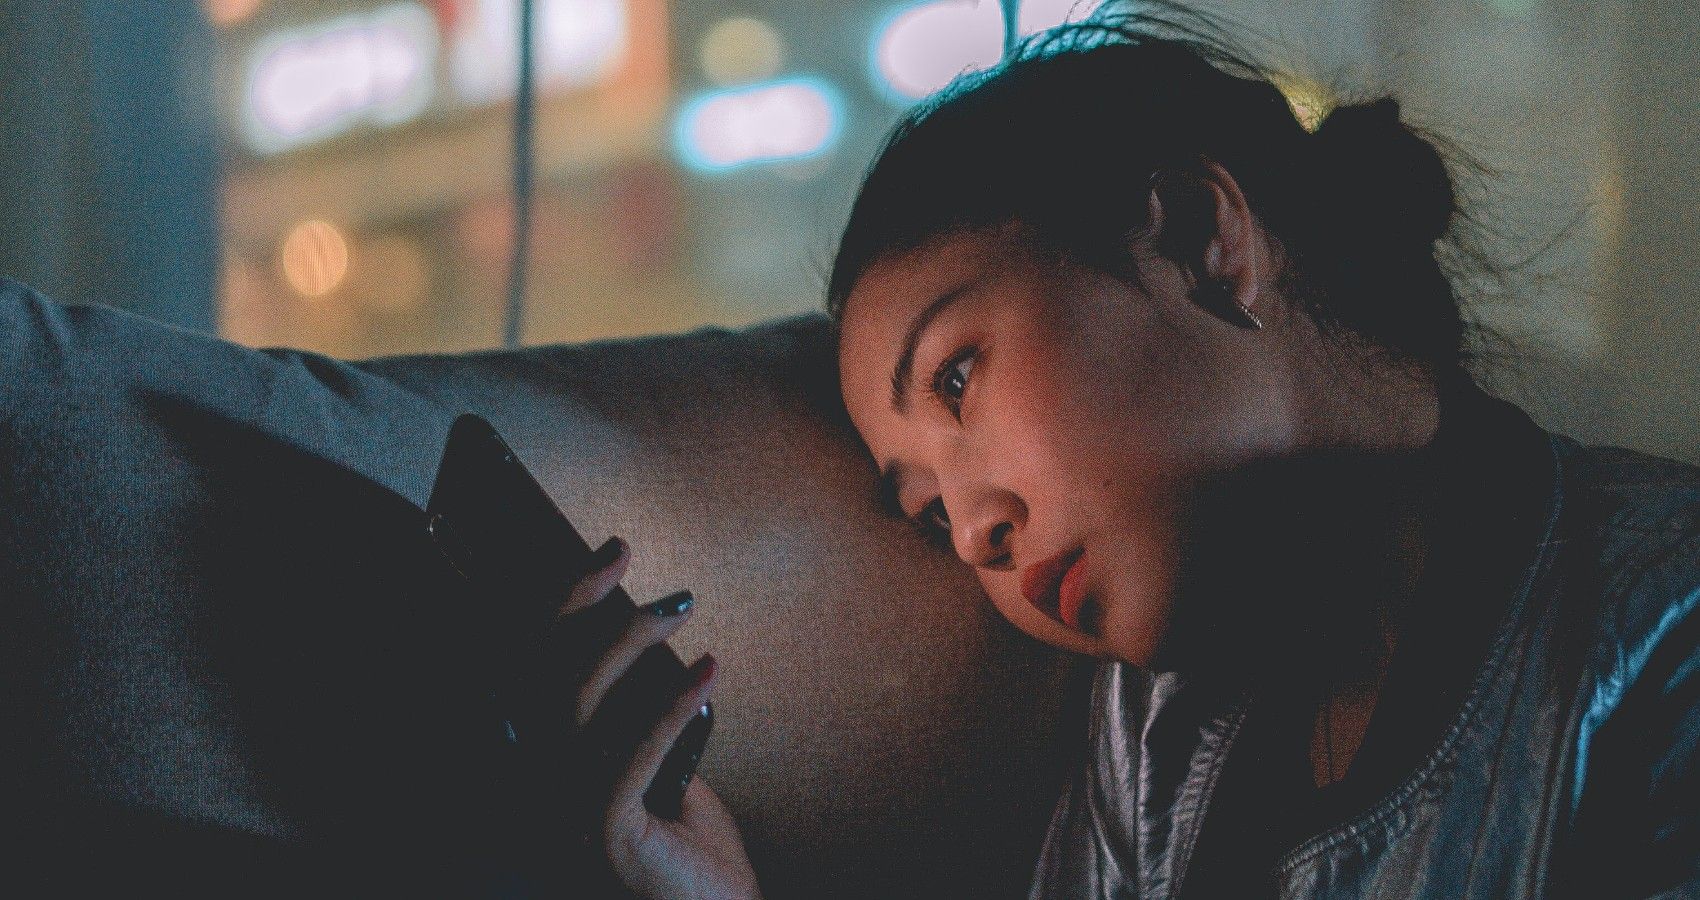 A teenager sitting and looking on her phone